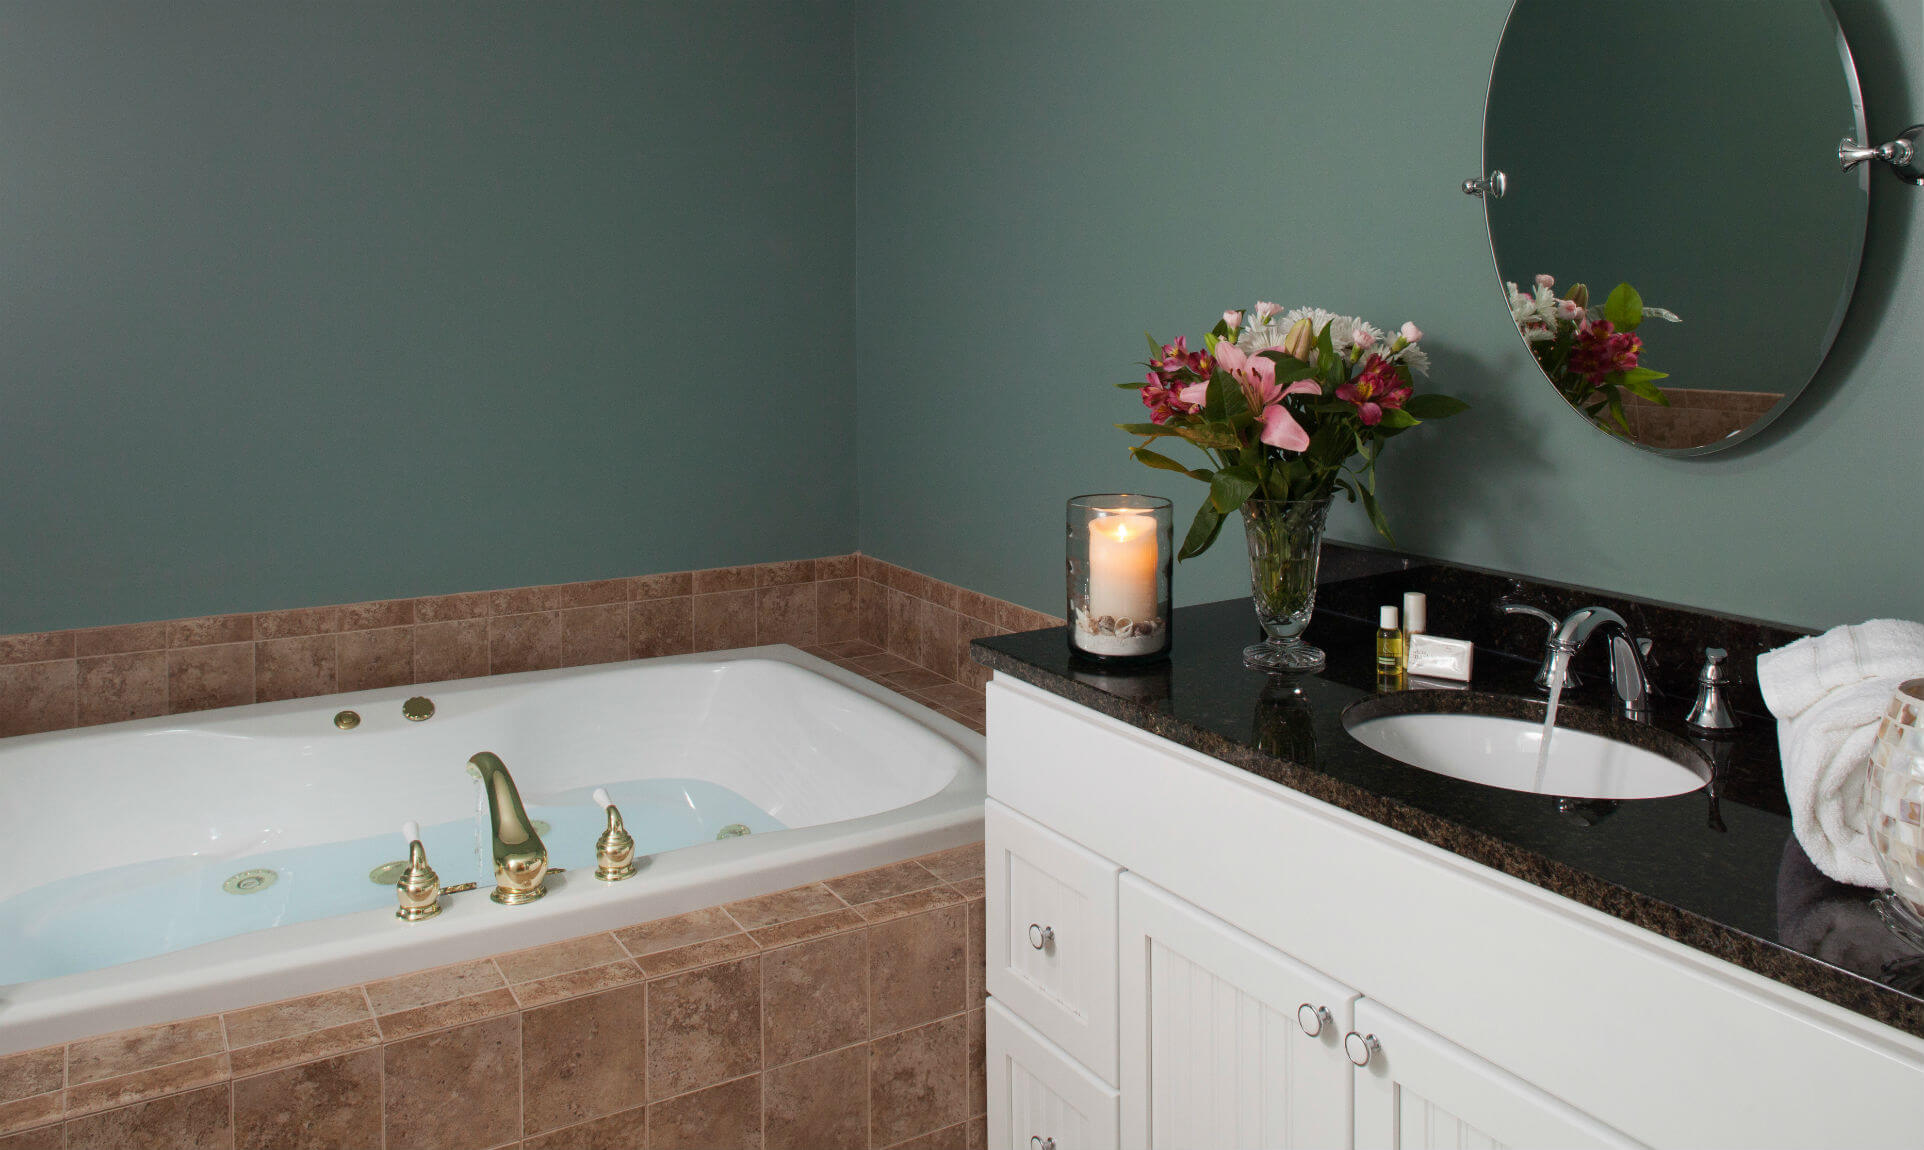 Jetted spa tub next to sink with flowers and candle